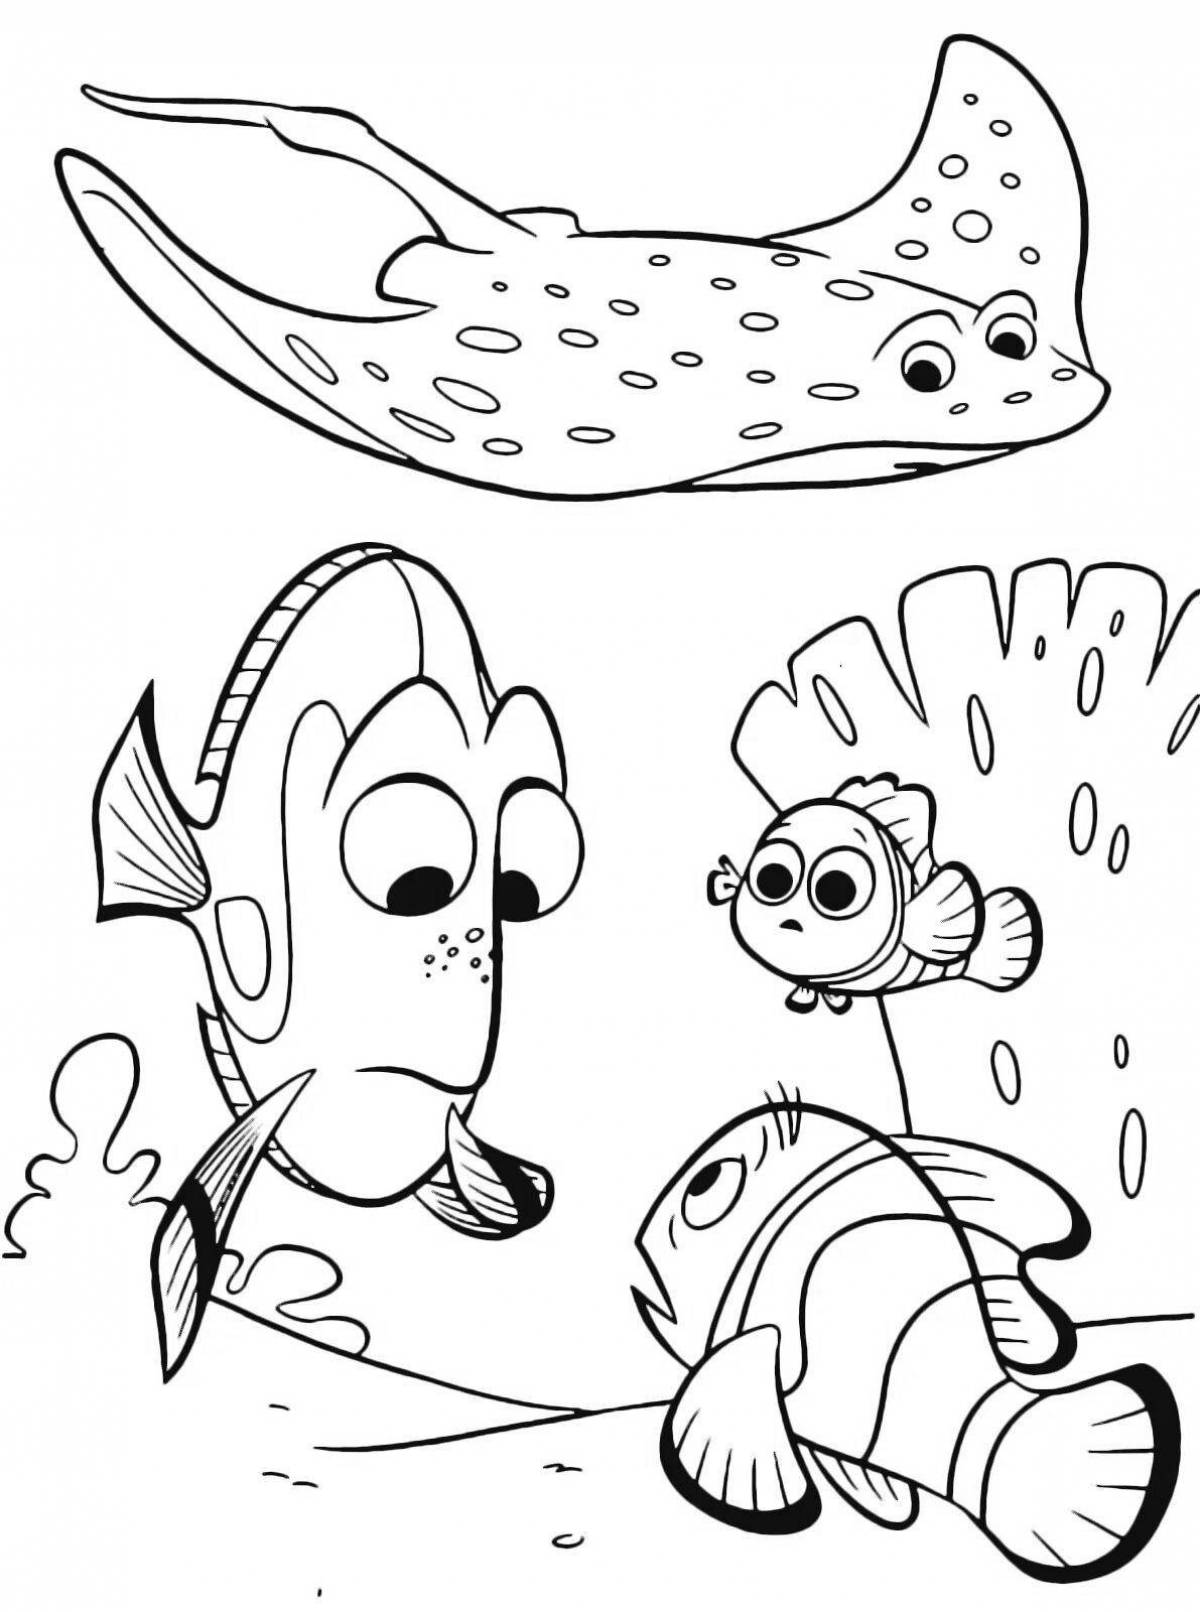 Sweet sea life coloring pages for 3-4 year olds